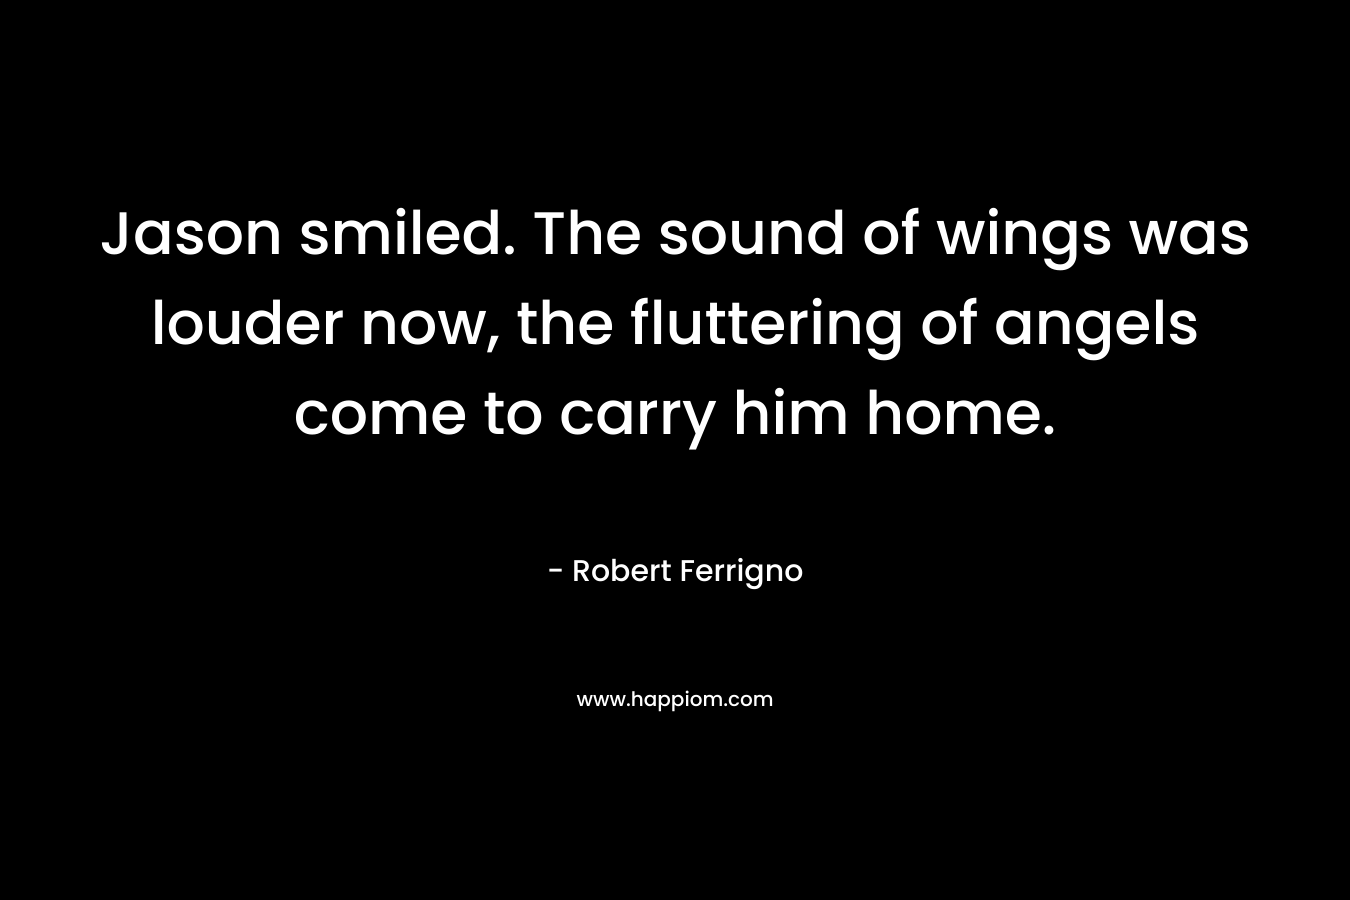 Jason smiled. The sound of wings was louder now, the fluttering of angels come to carry him home. – Robert Ferrigno